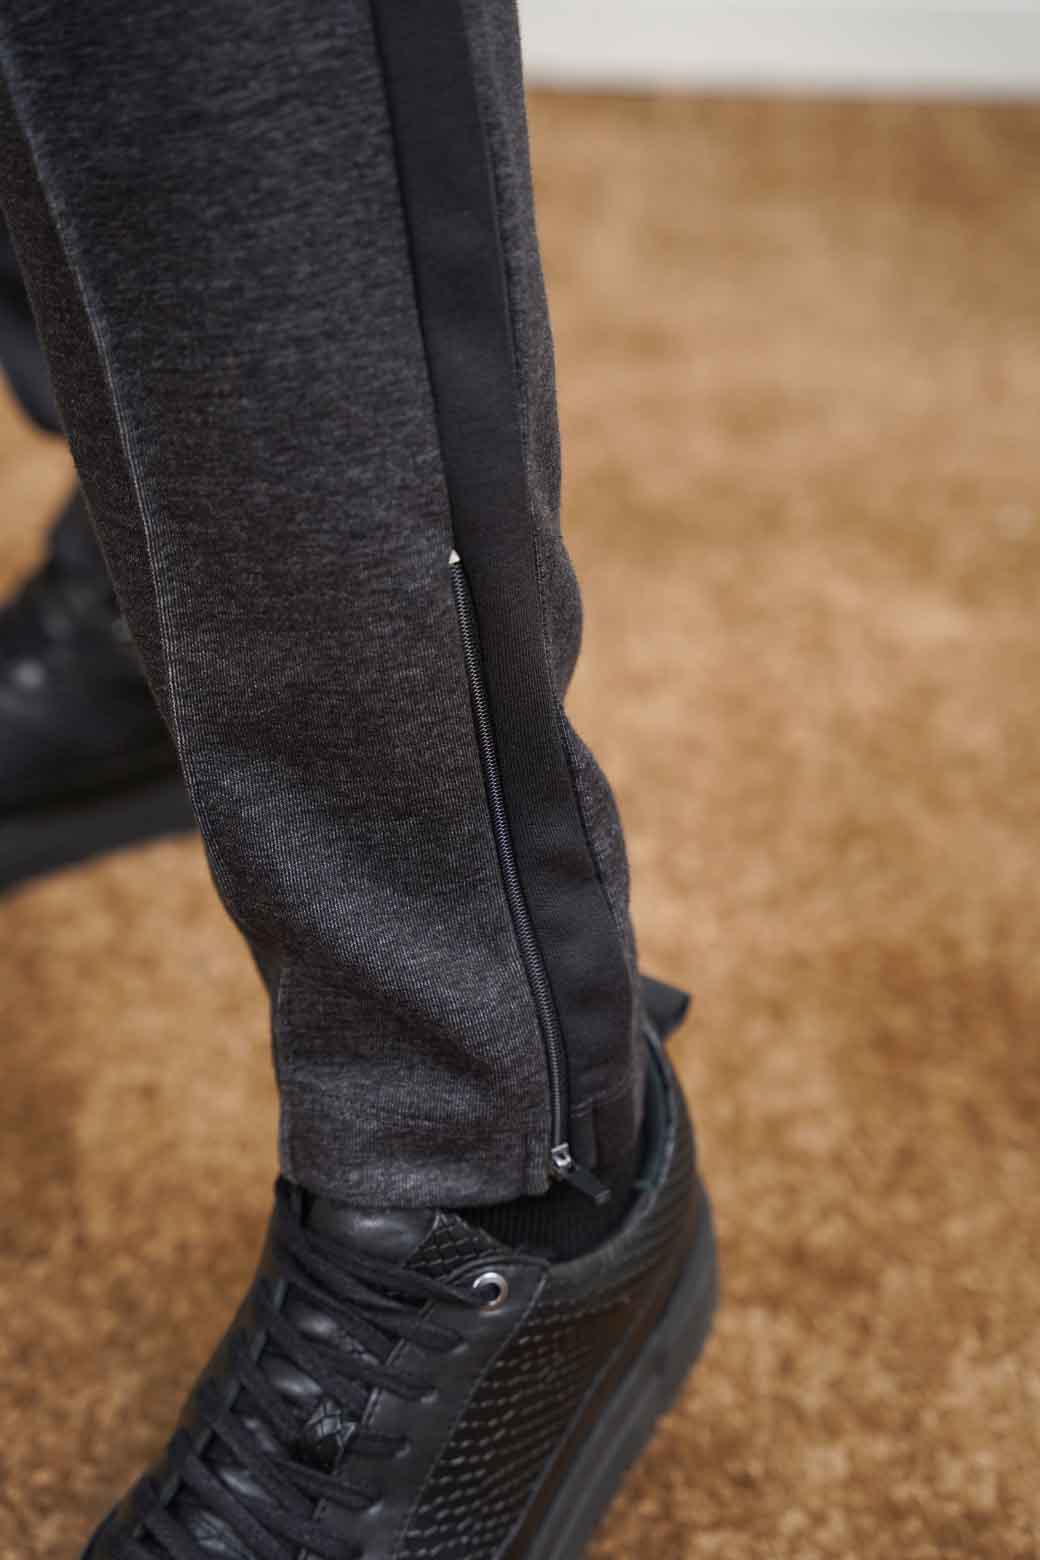 CHARCOAL TROUSER WITH SIDE PANEL